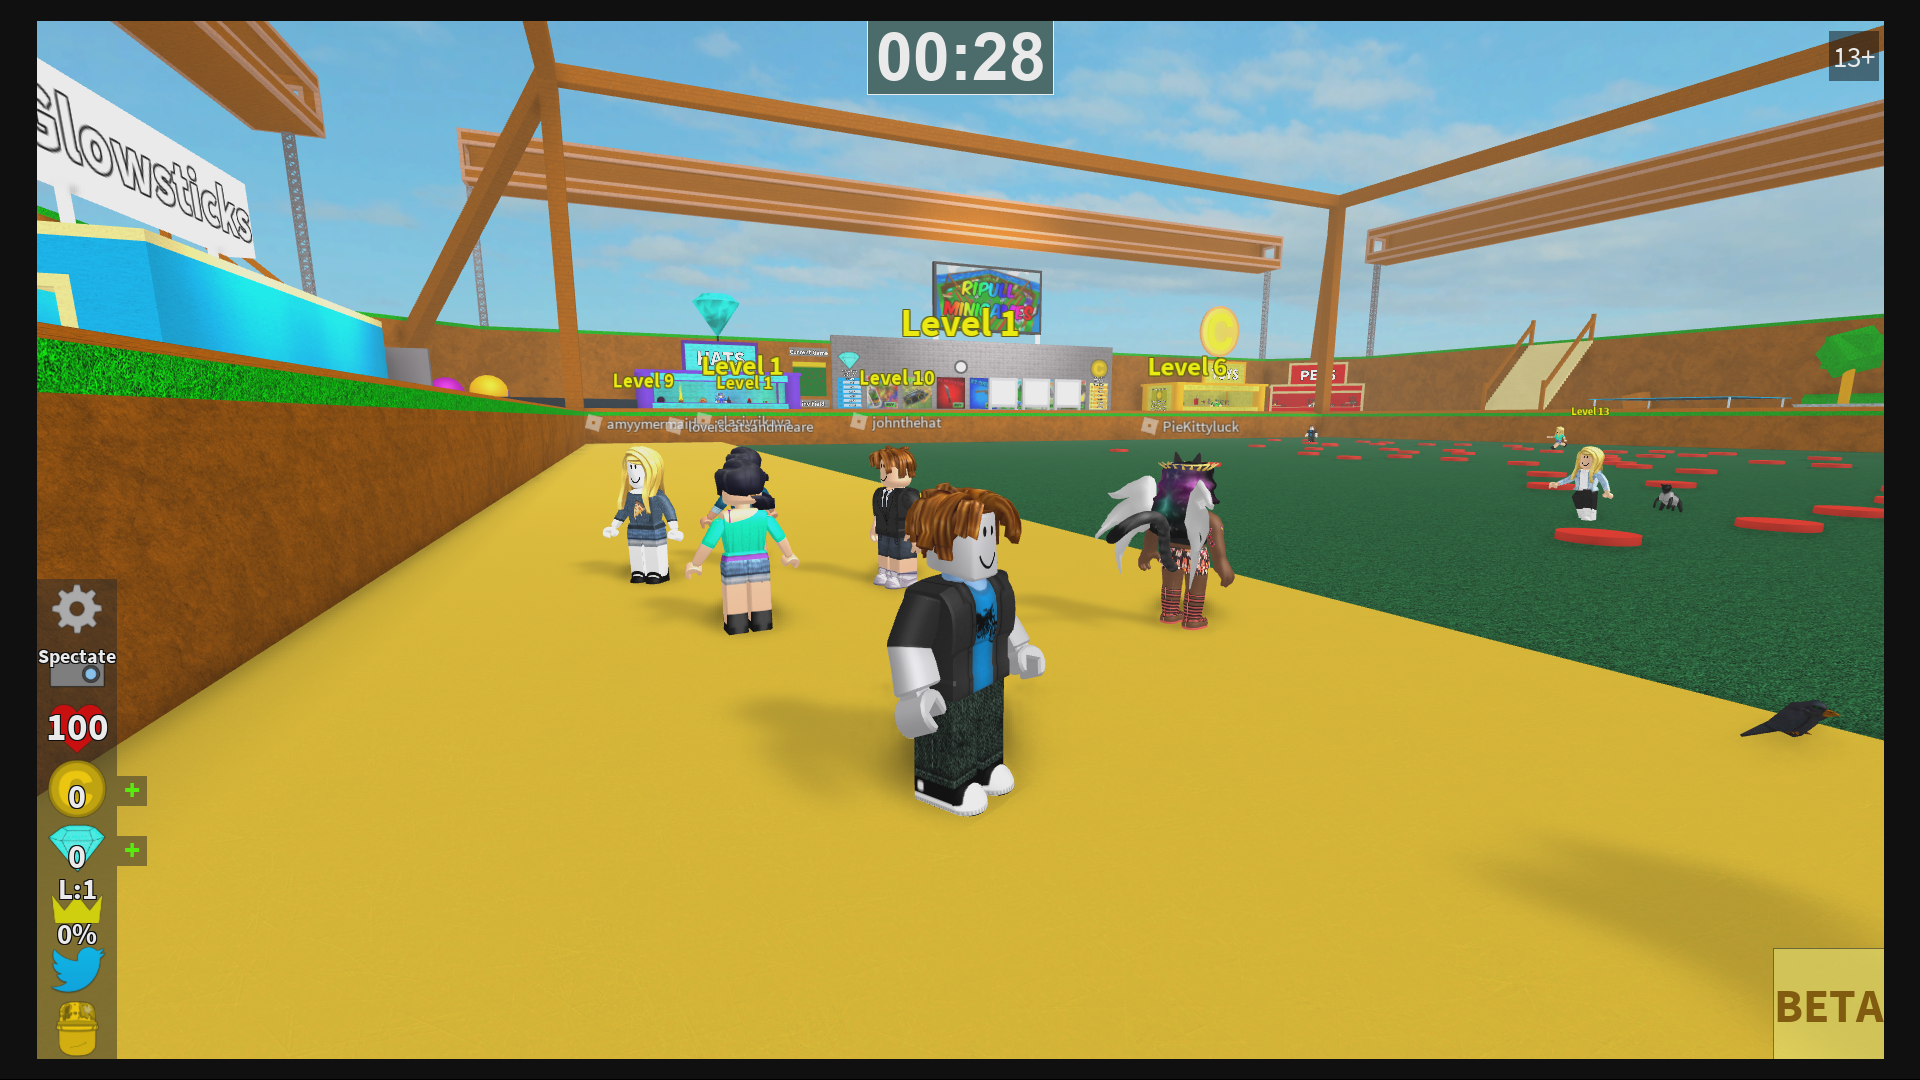 Adding Roblox Friends Xbox 1 From Pc